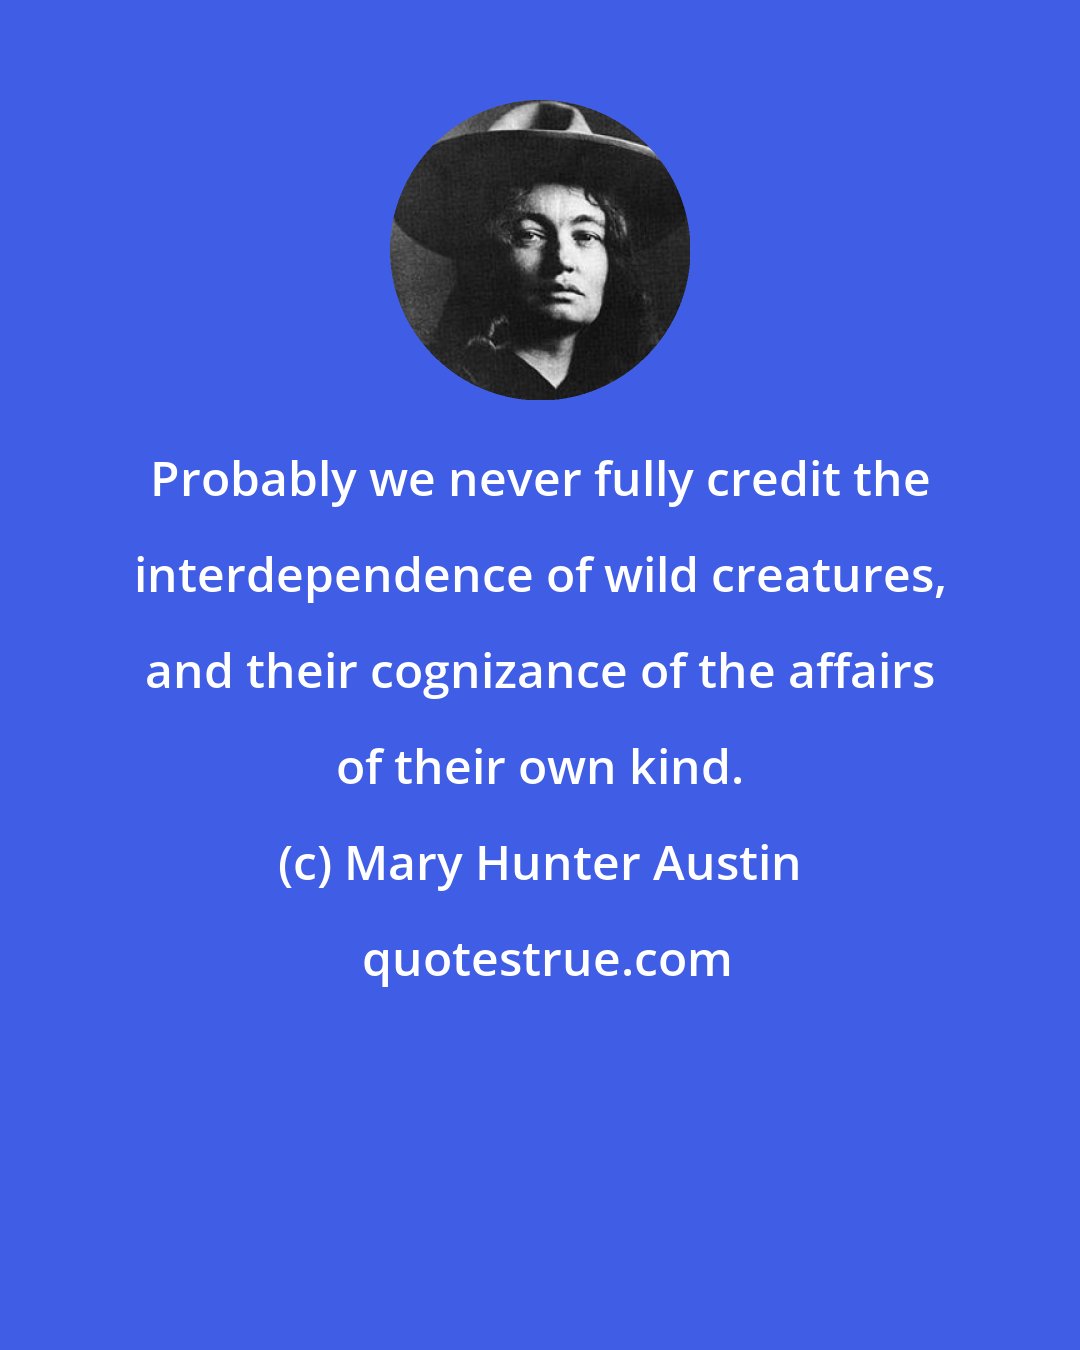 Mary Hunter Austin: Probably we never fully credit the interdependence of wild creatures, and their cognizance of the affairs of their own kind.